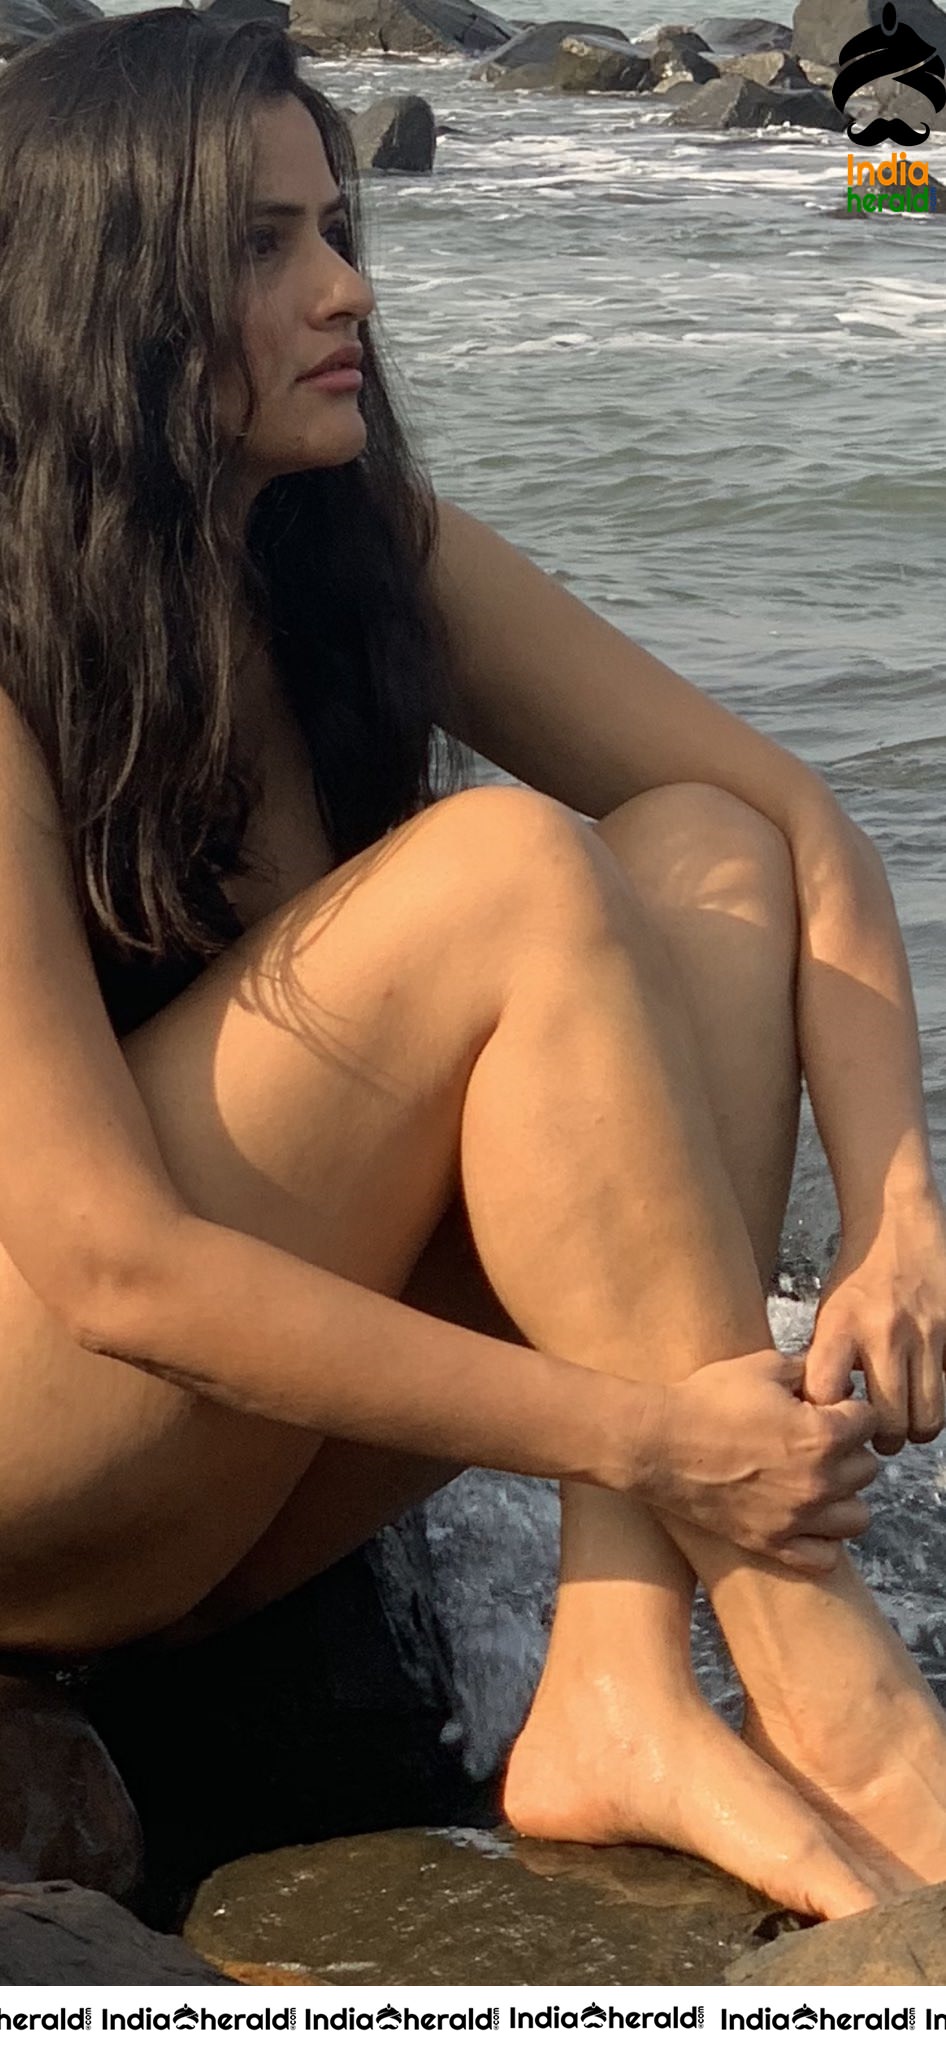 Sona Mohapatra Sizzles in Bikini and Sexposes on the Beach Set 1